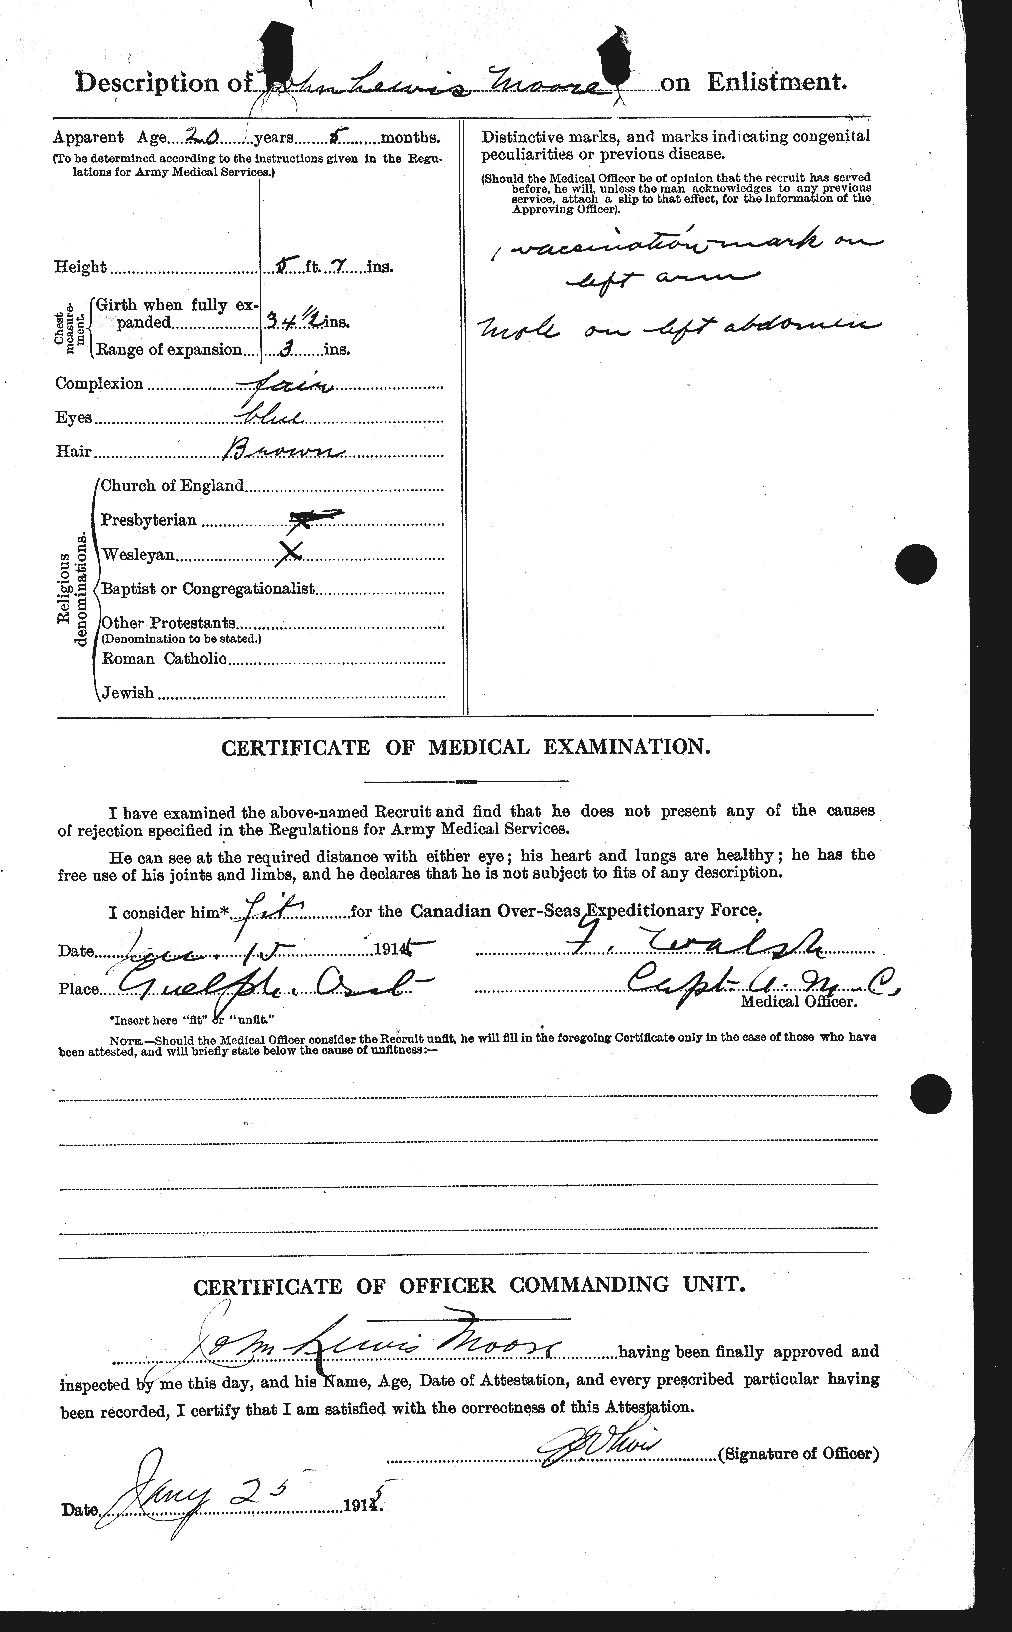 Personnel Records of the First World War - CEF 503309b